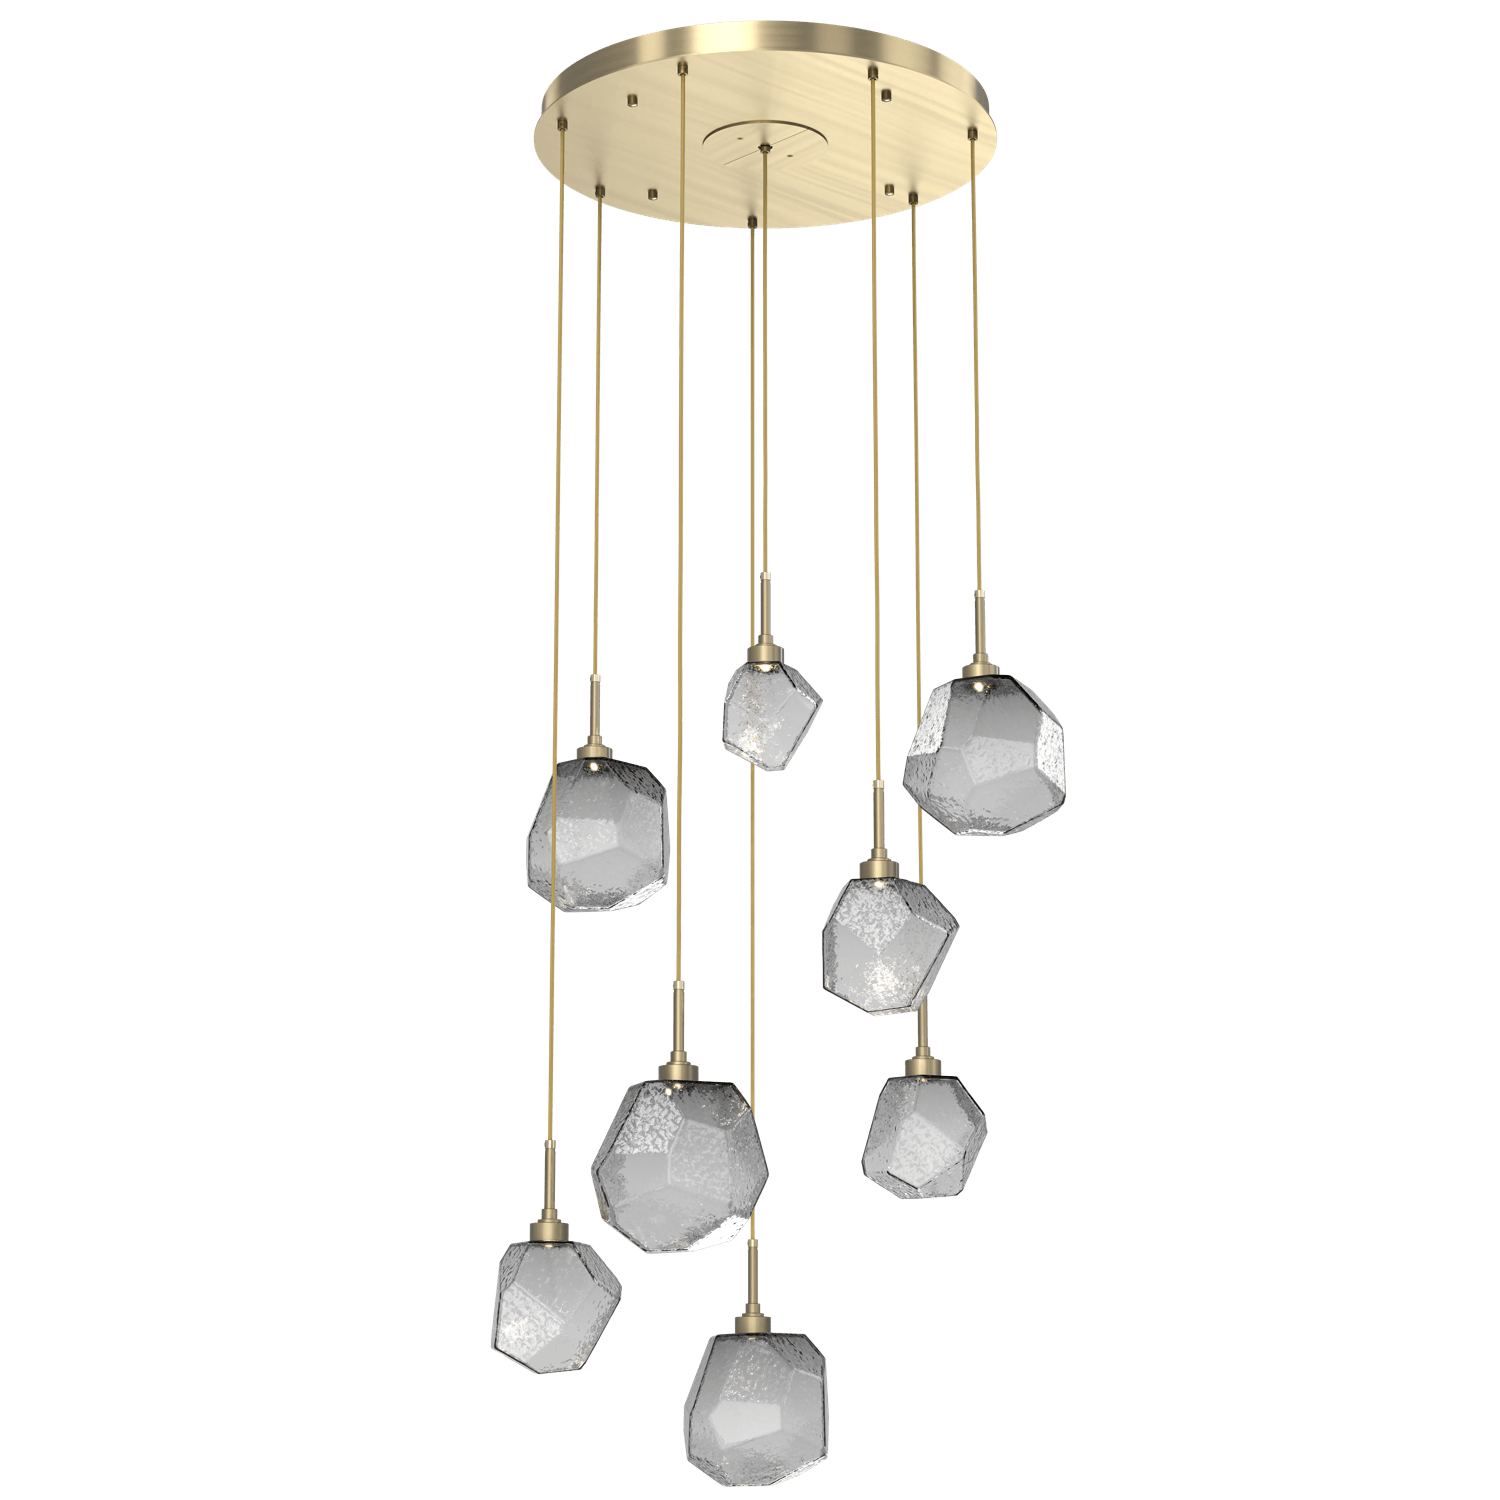 CHB0039-08-HB-S-Hammerton-Studio-Gem-8-light-round-pendant-chandelier-with-heritage-brass-finish-and-smoke-blown-glass-shades-and-LED-lamping